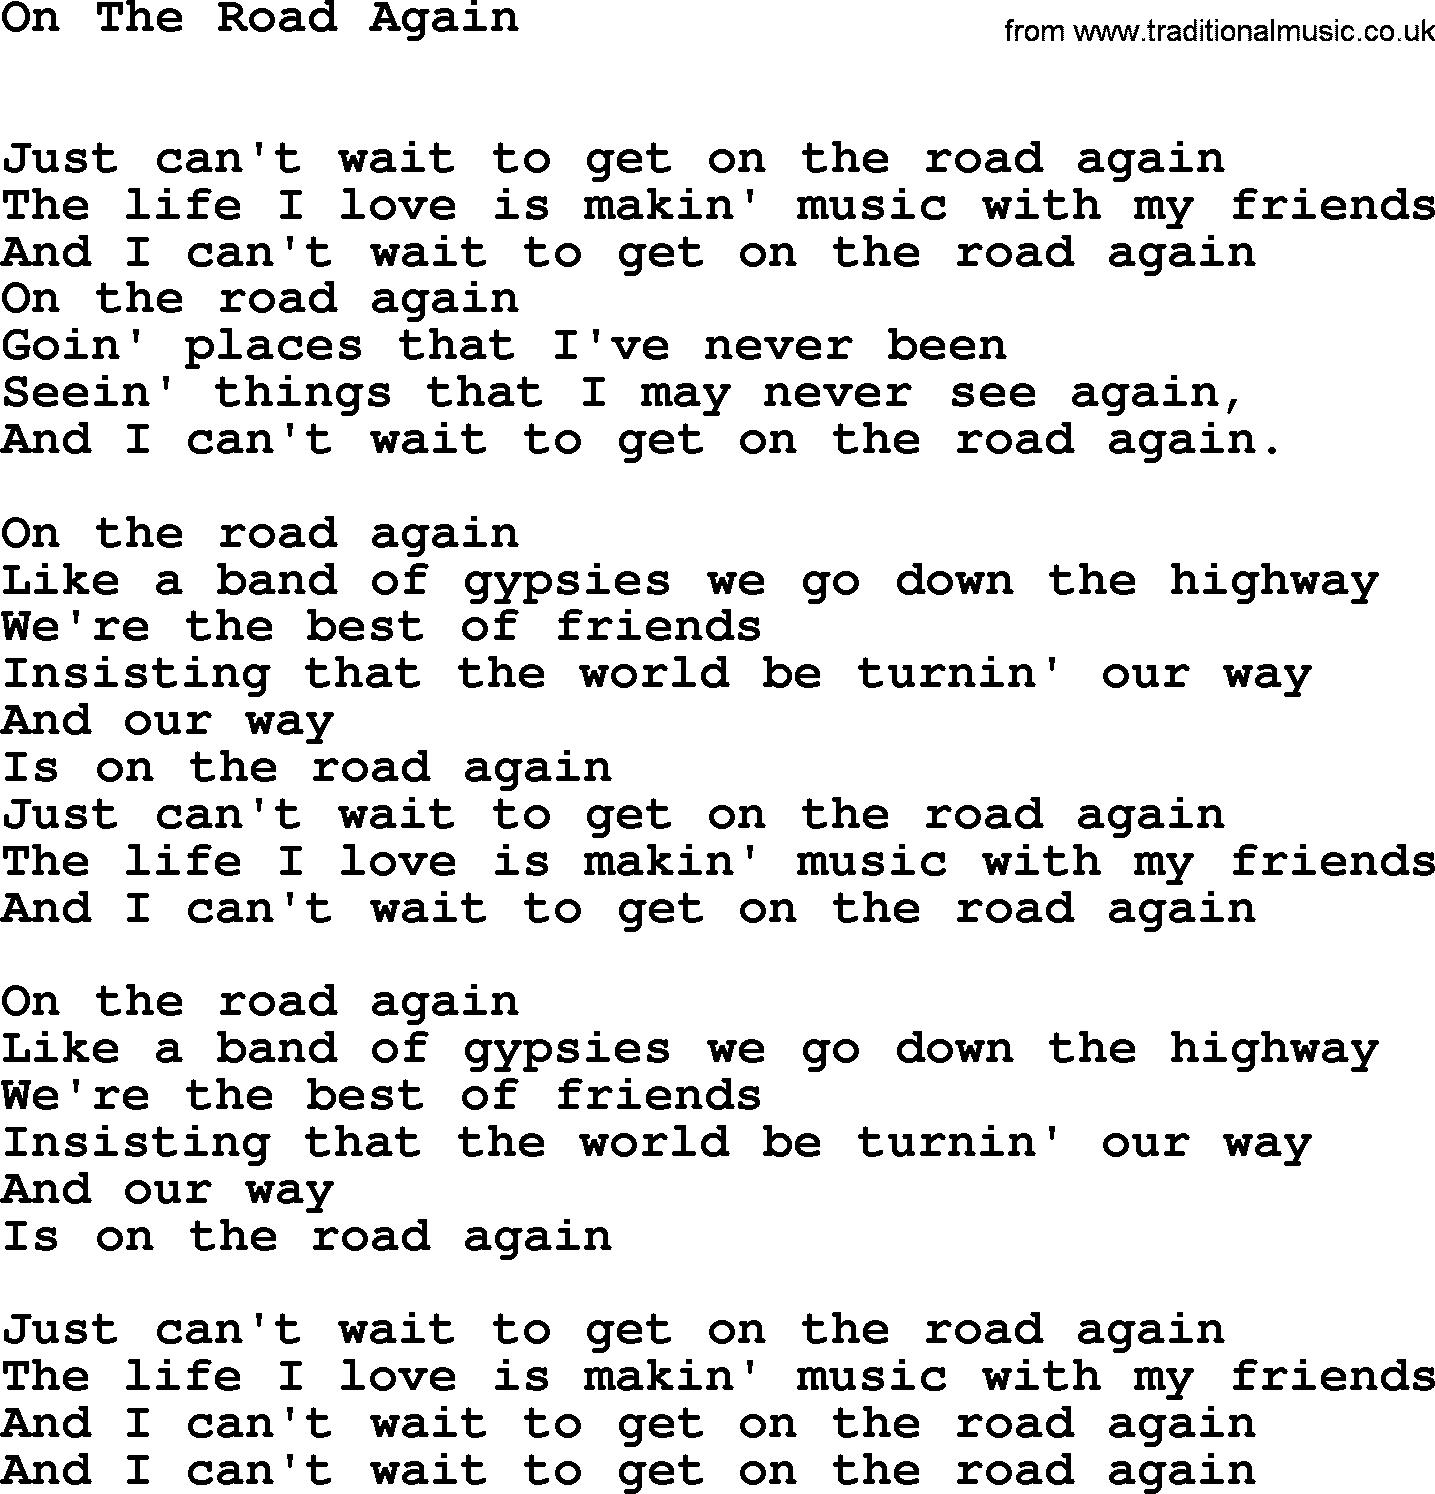 Willie Nelson song: On The Road Again lyrics